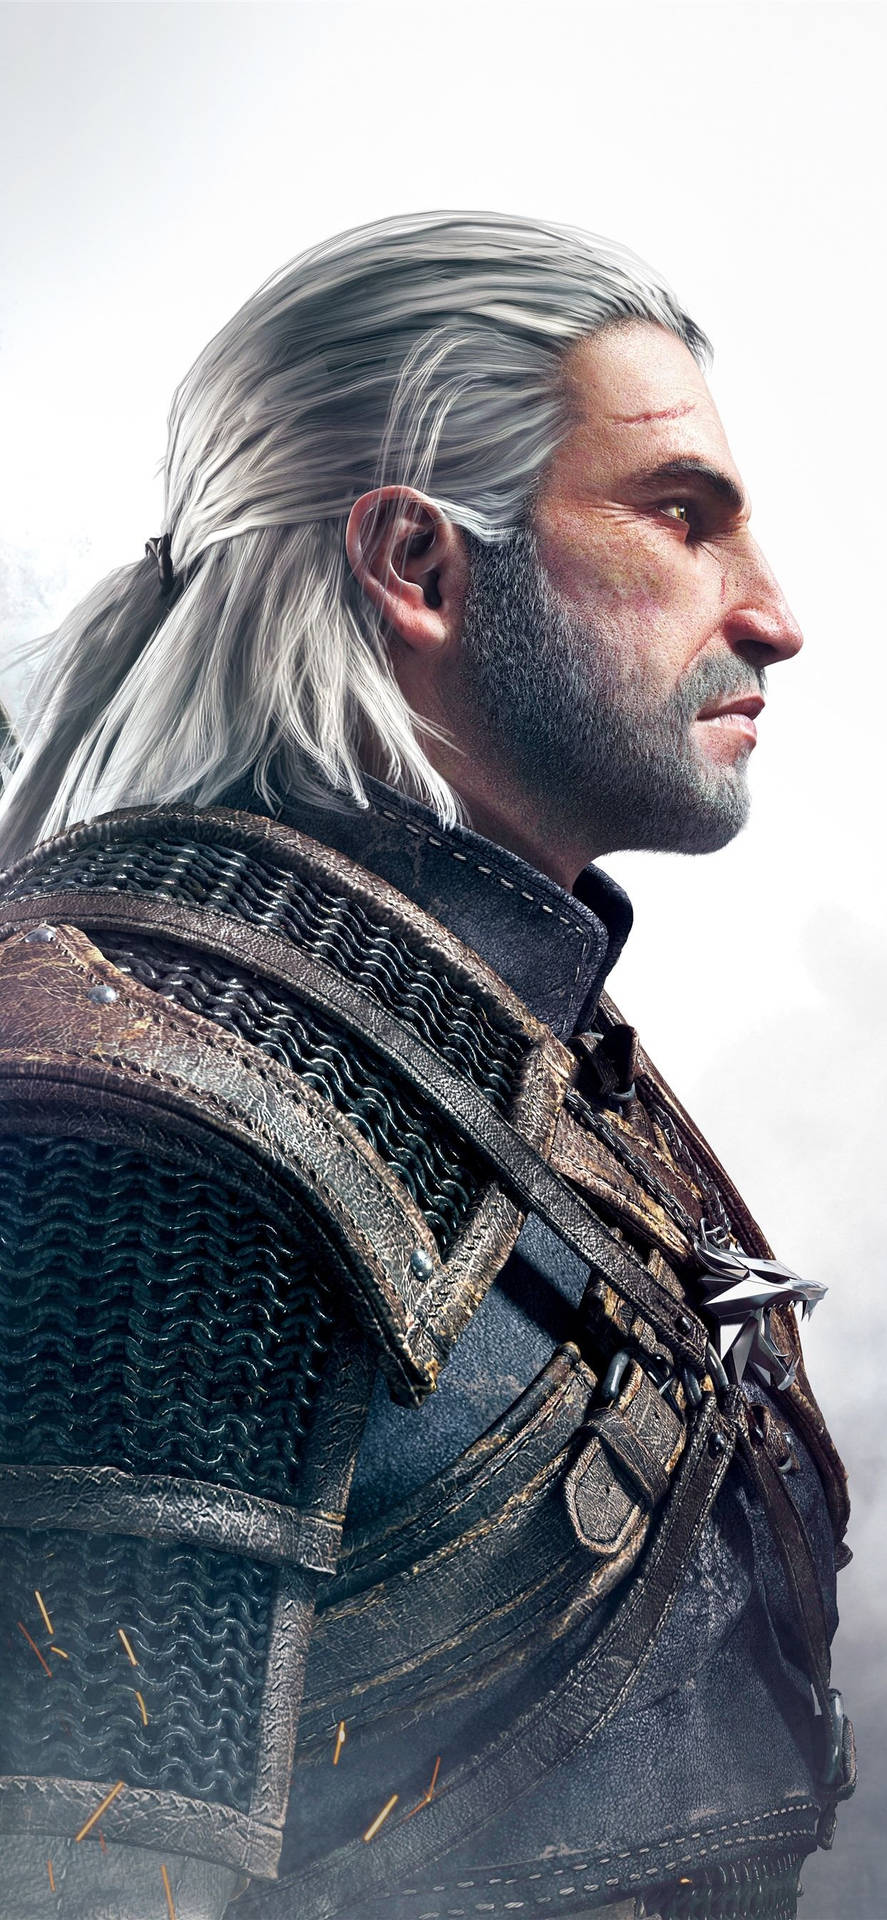 Engrossed in Adventure - The Witcher 3 on Android Wallpaper